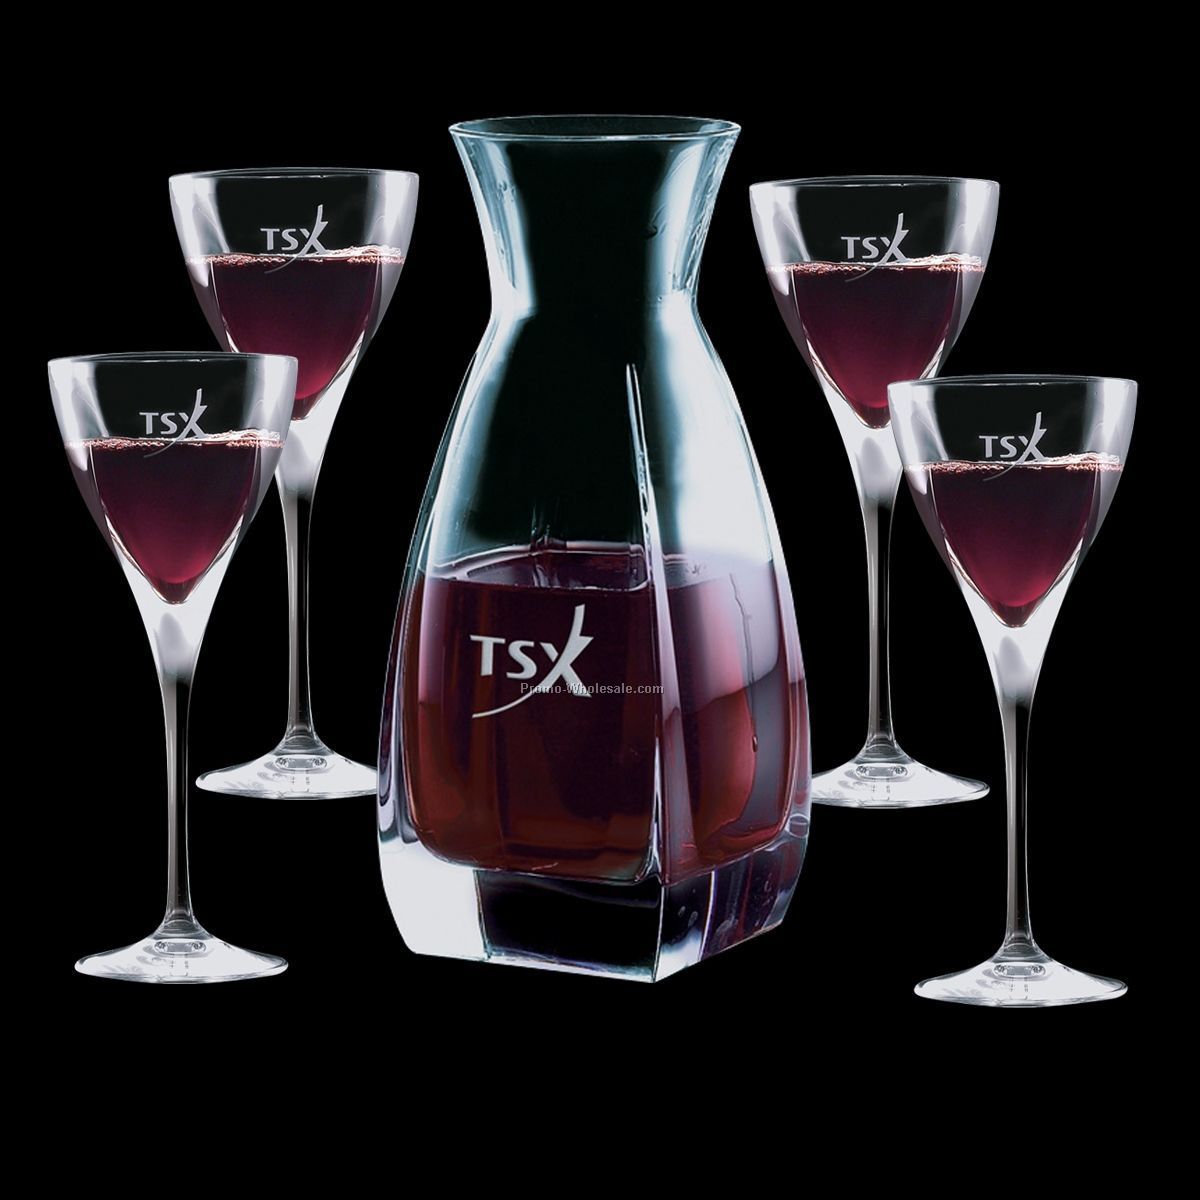 Chesswood Crystal Decanter & 4 Wine Glasses